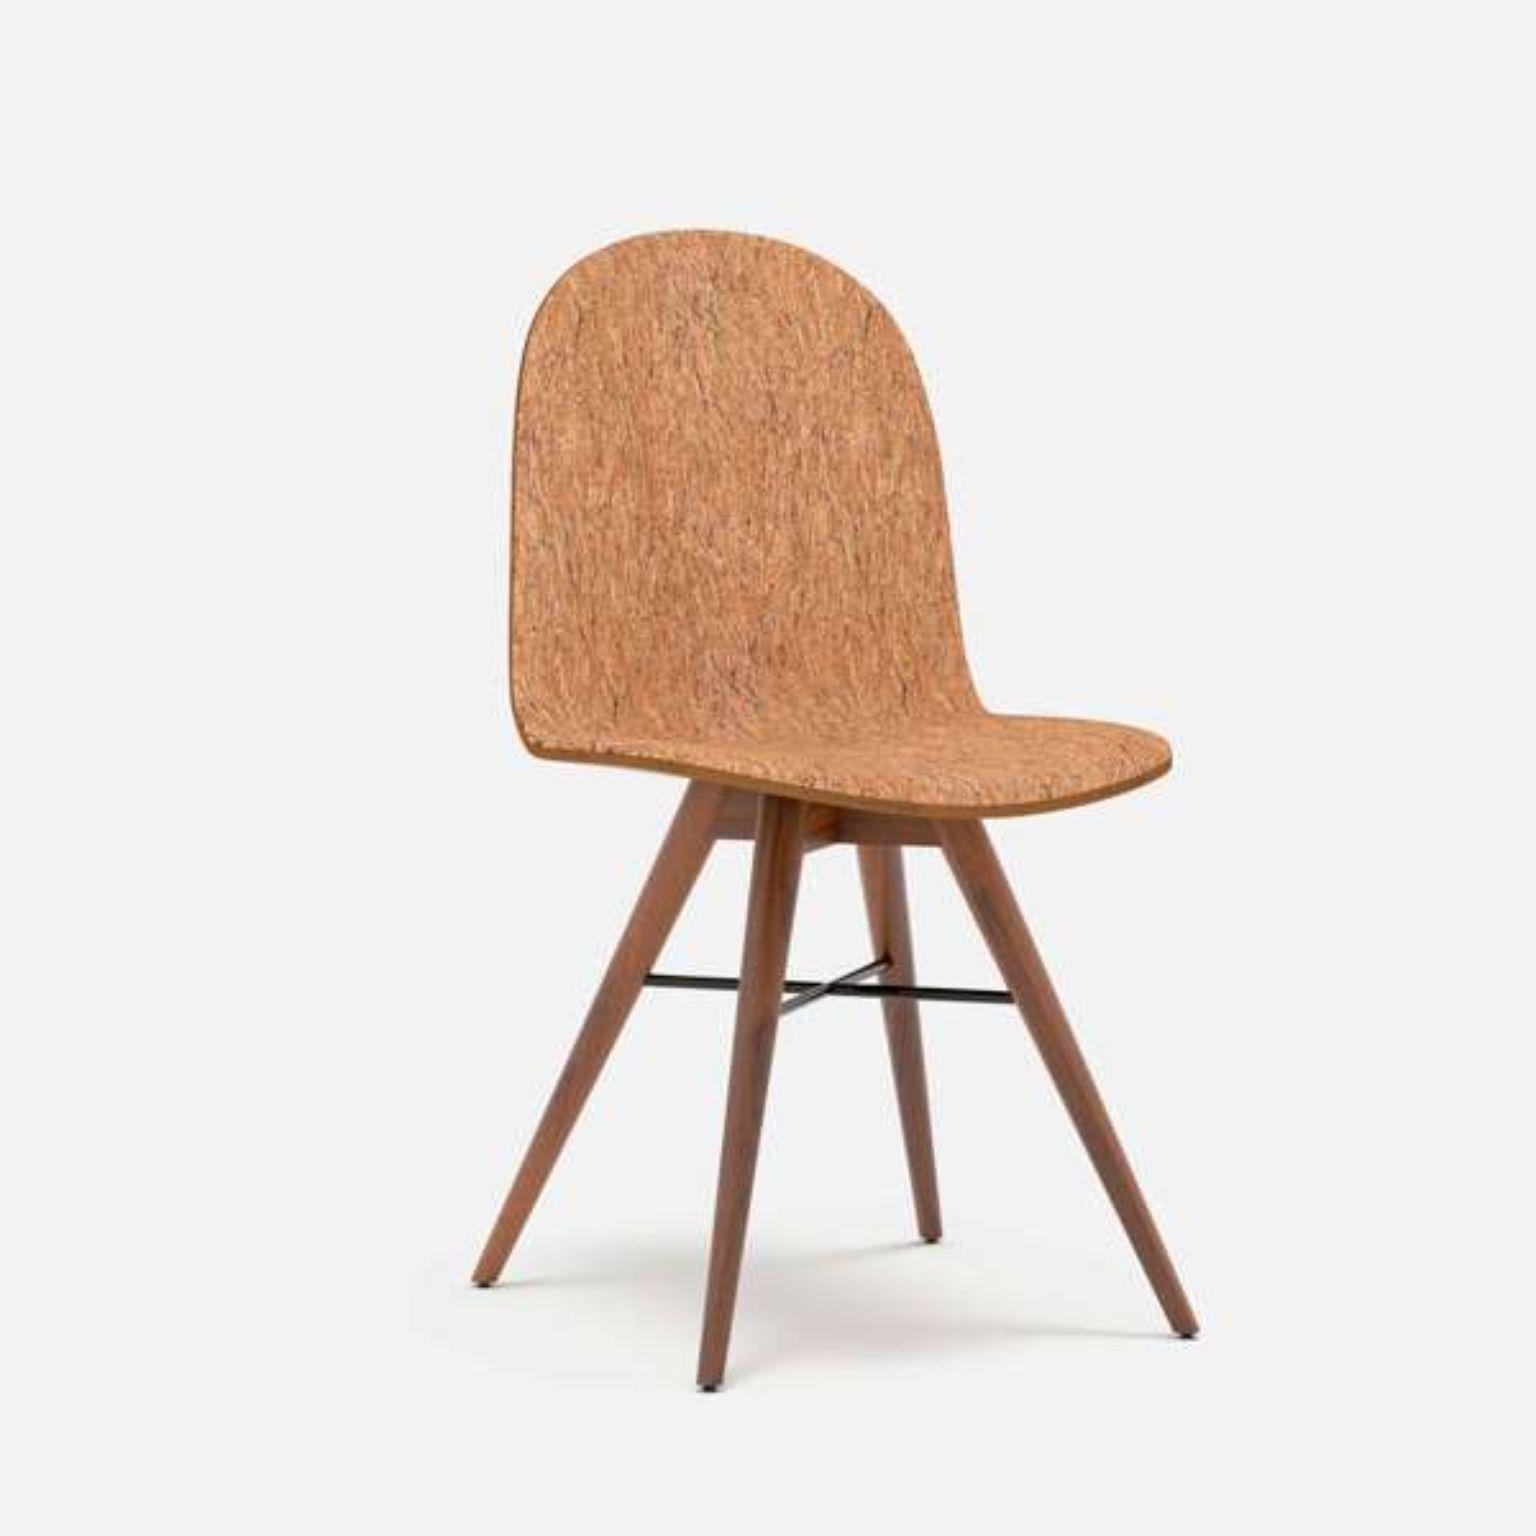 Walnut and corkfabric contemporary chair by Alexandre Caldas
Dimensions: W 40 x D 40 x H 80 cm
Materials: American walnut 100% solid wood, corkabric

Structure available in beech, ash, oak, mix wood
Seat available in fabric, leather,